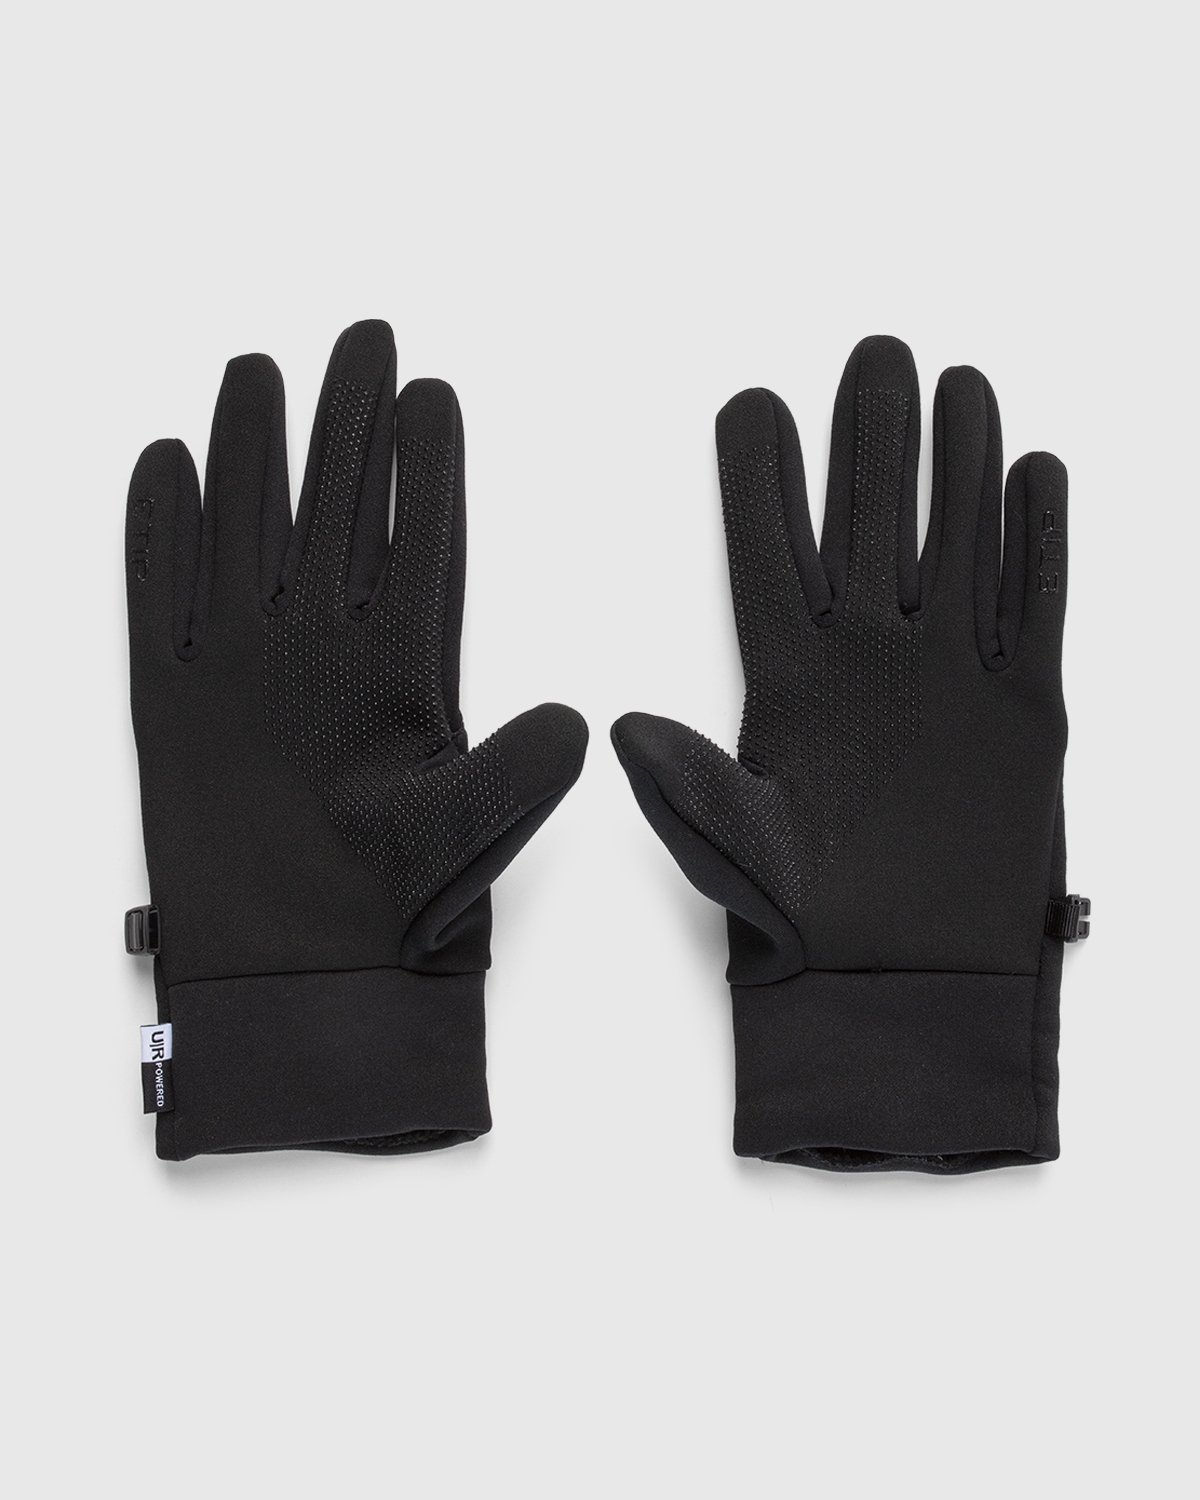 The North Face - Etip Recycled Gloves Black - Accessories - Black - Image 2